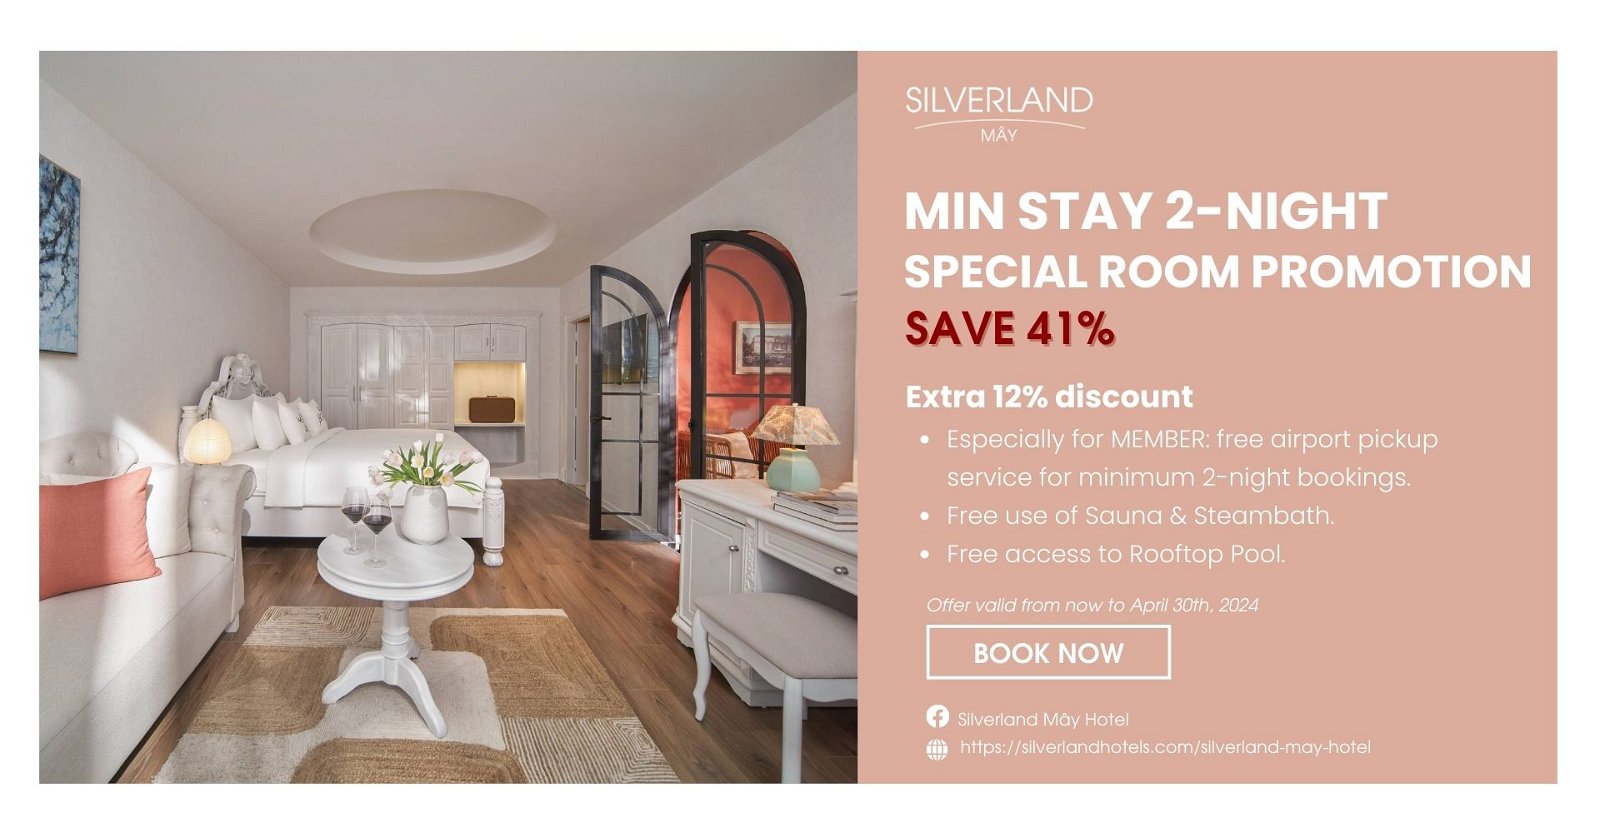 SILVERLAND MÂY – MIN STAY 2 NIGHT PACKAGE – ROOM ONLY (SAVE 41%)